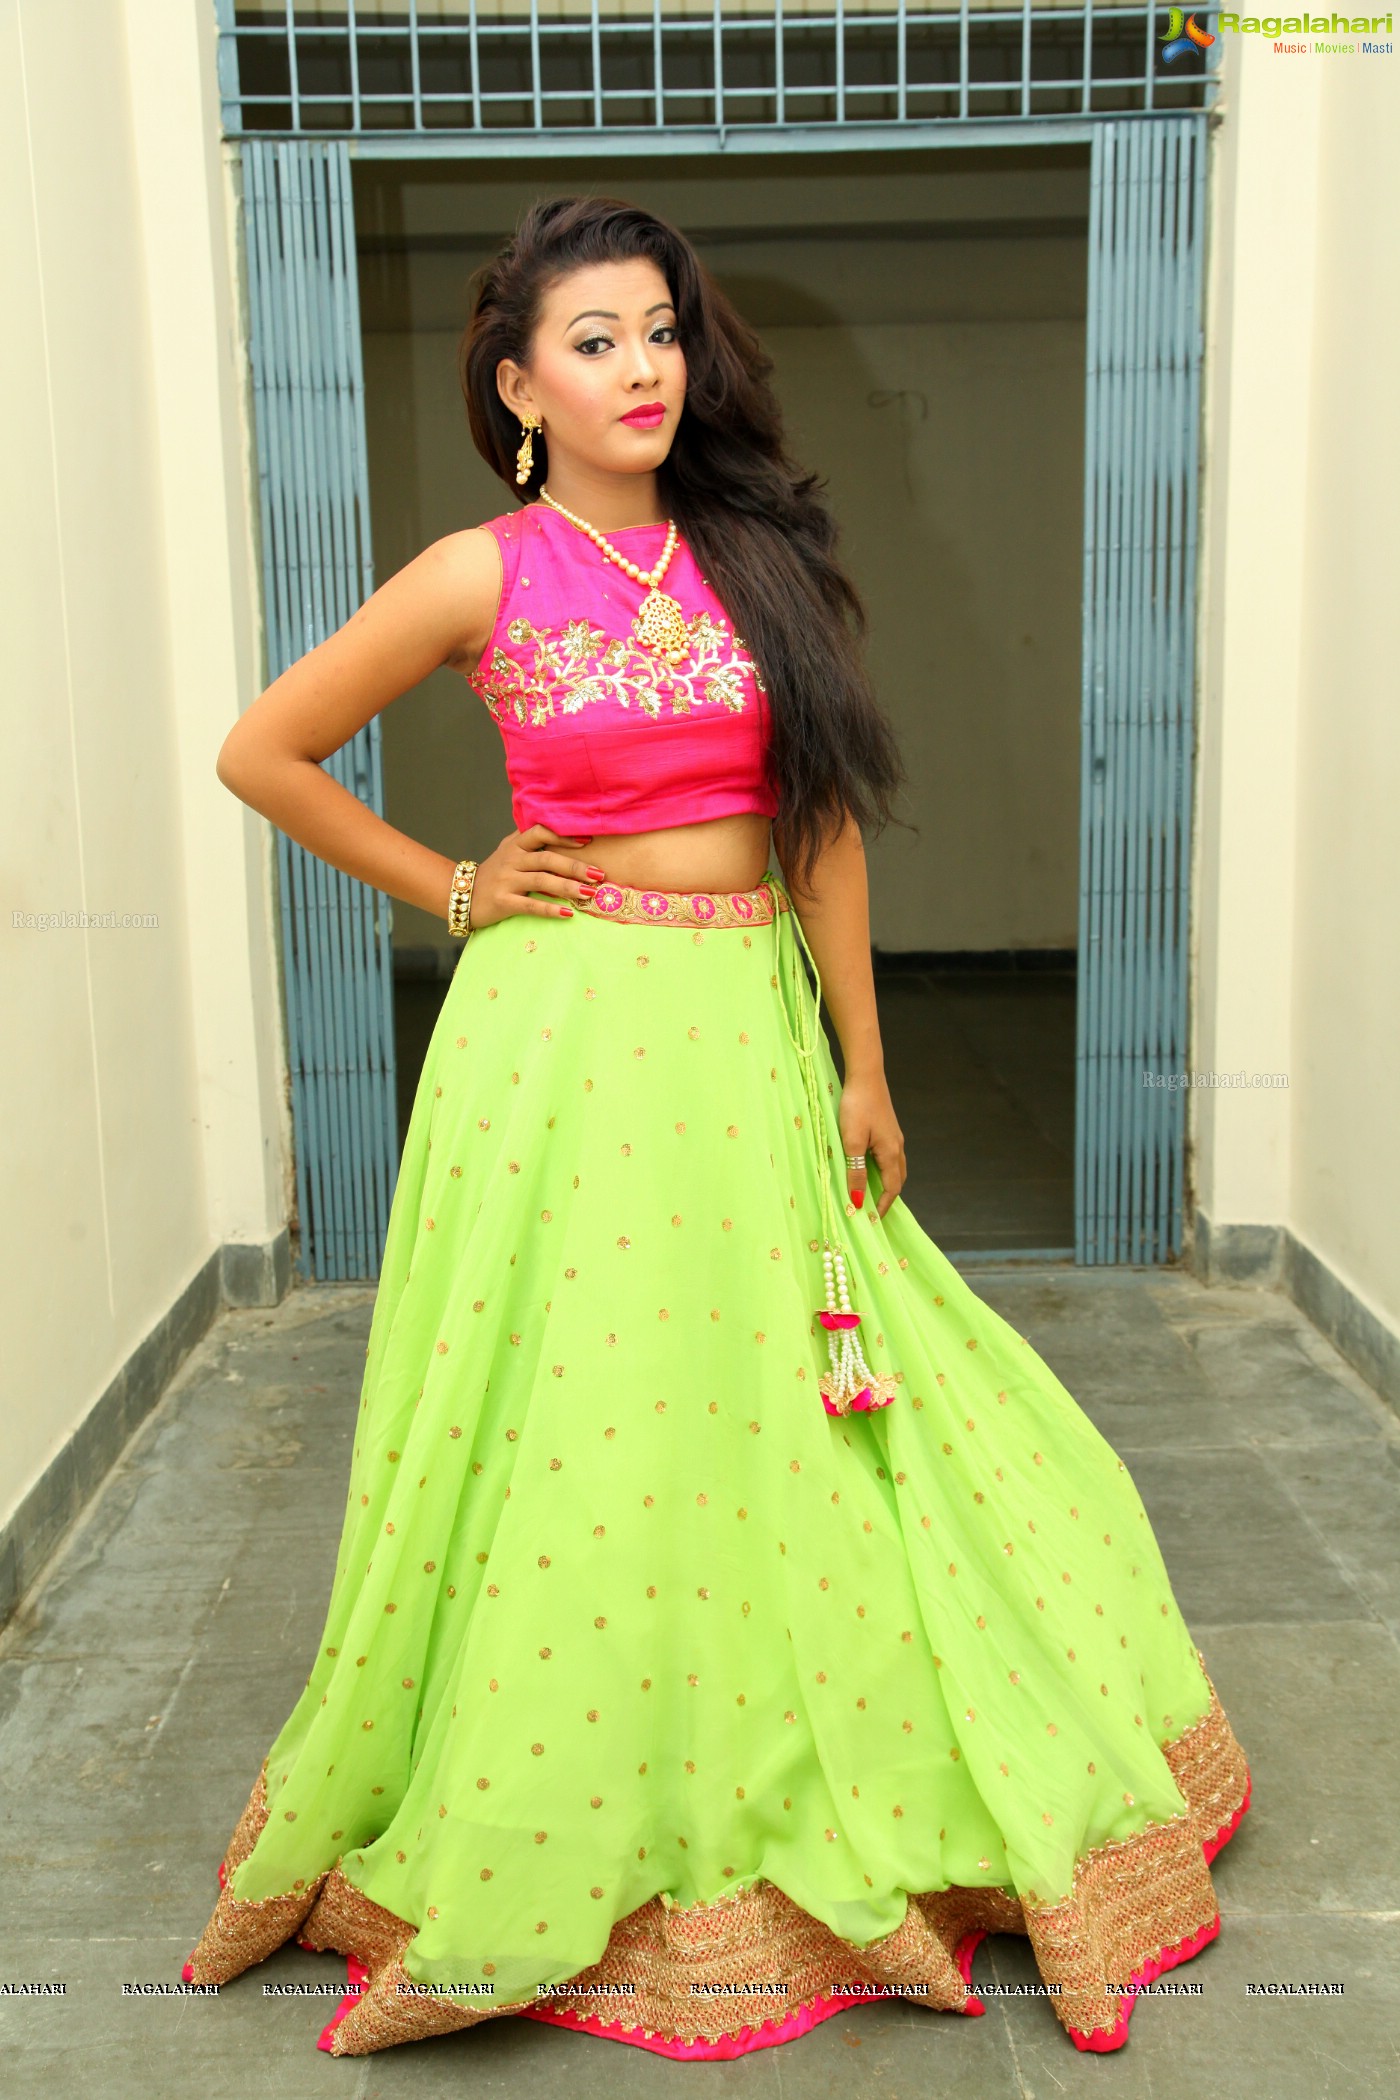 Kavitha at Ms. and Mr Tehzeed Grand Finale (Posters)